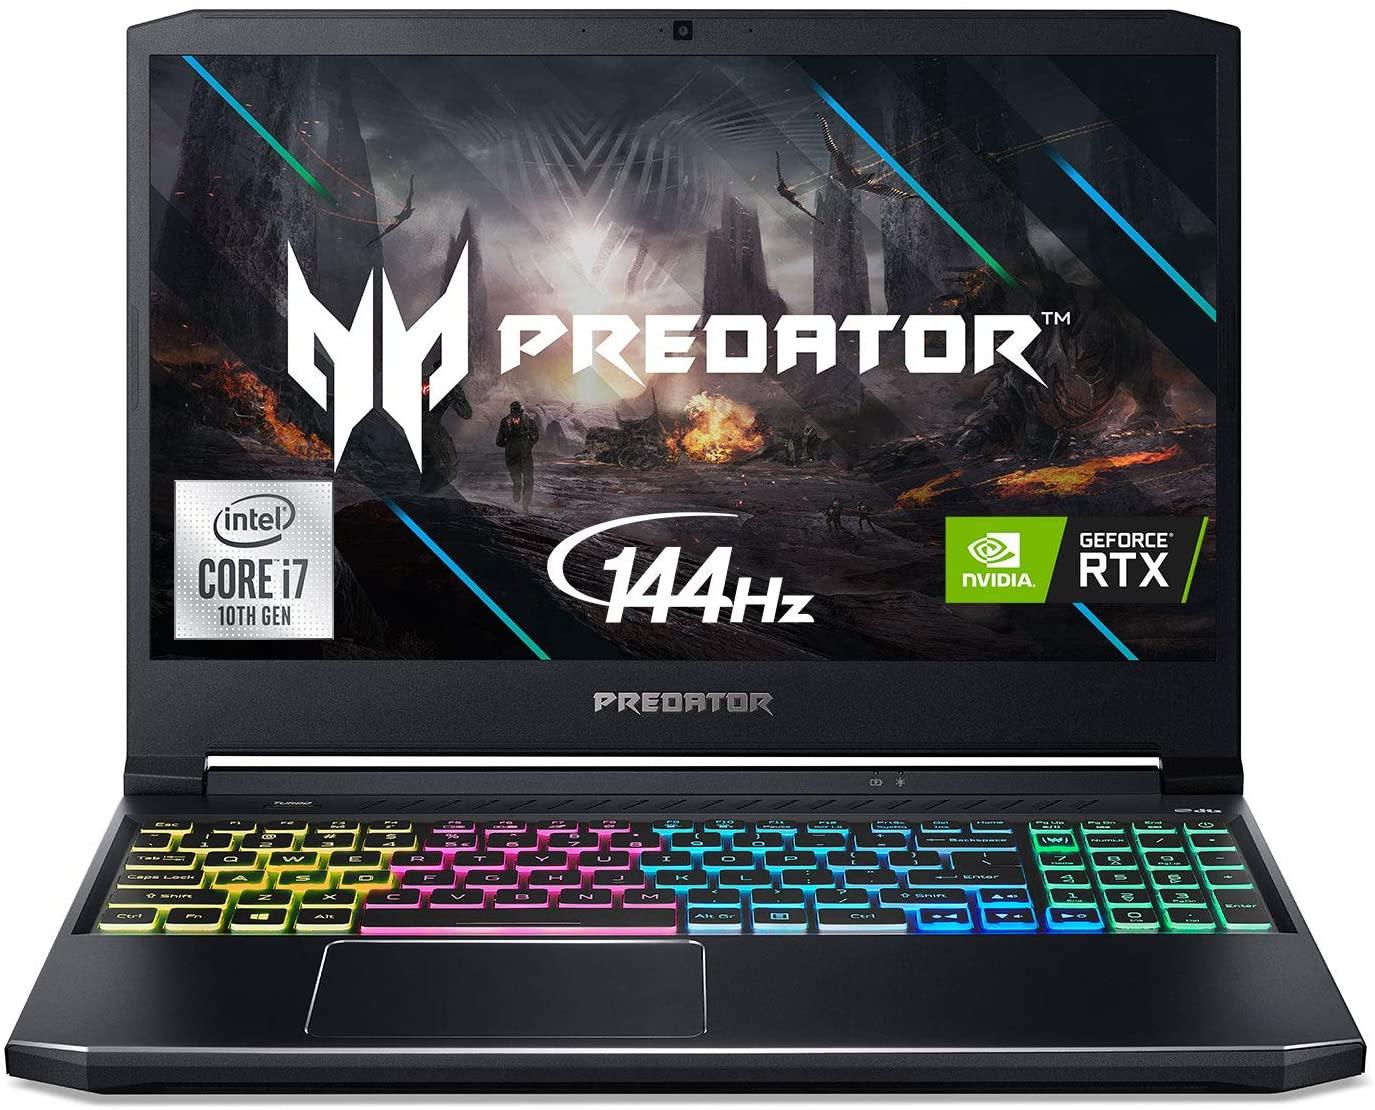 Acer 15.6in Predator Helios 300 i7 16GB Gaming Laptop for $999.99 Shipped